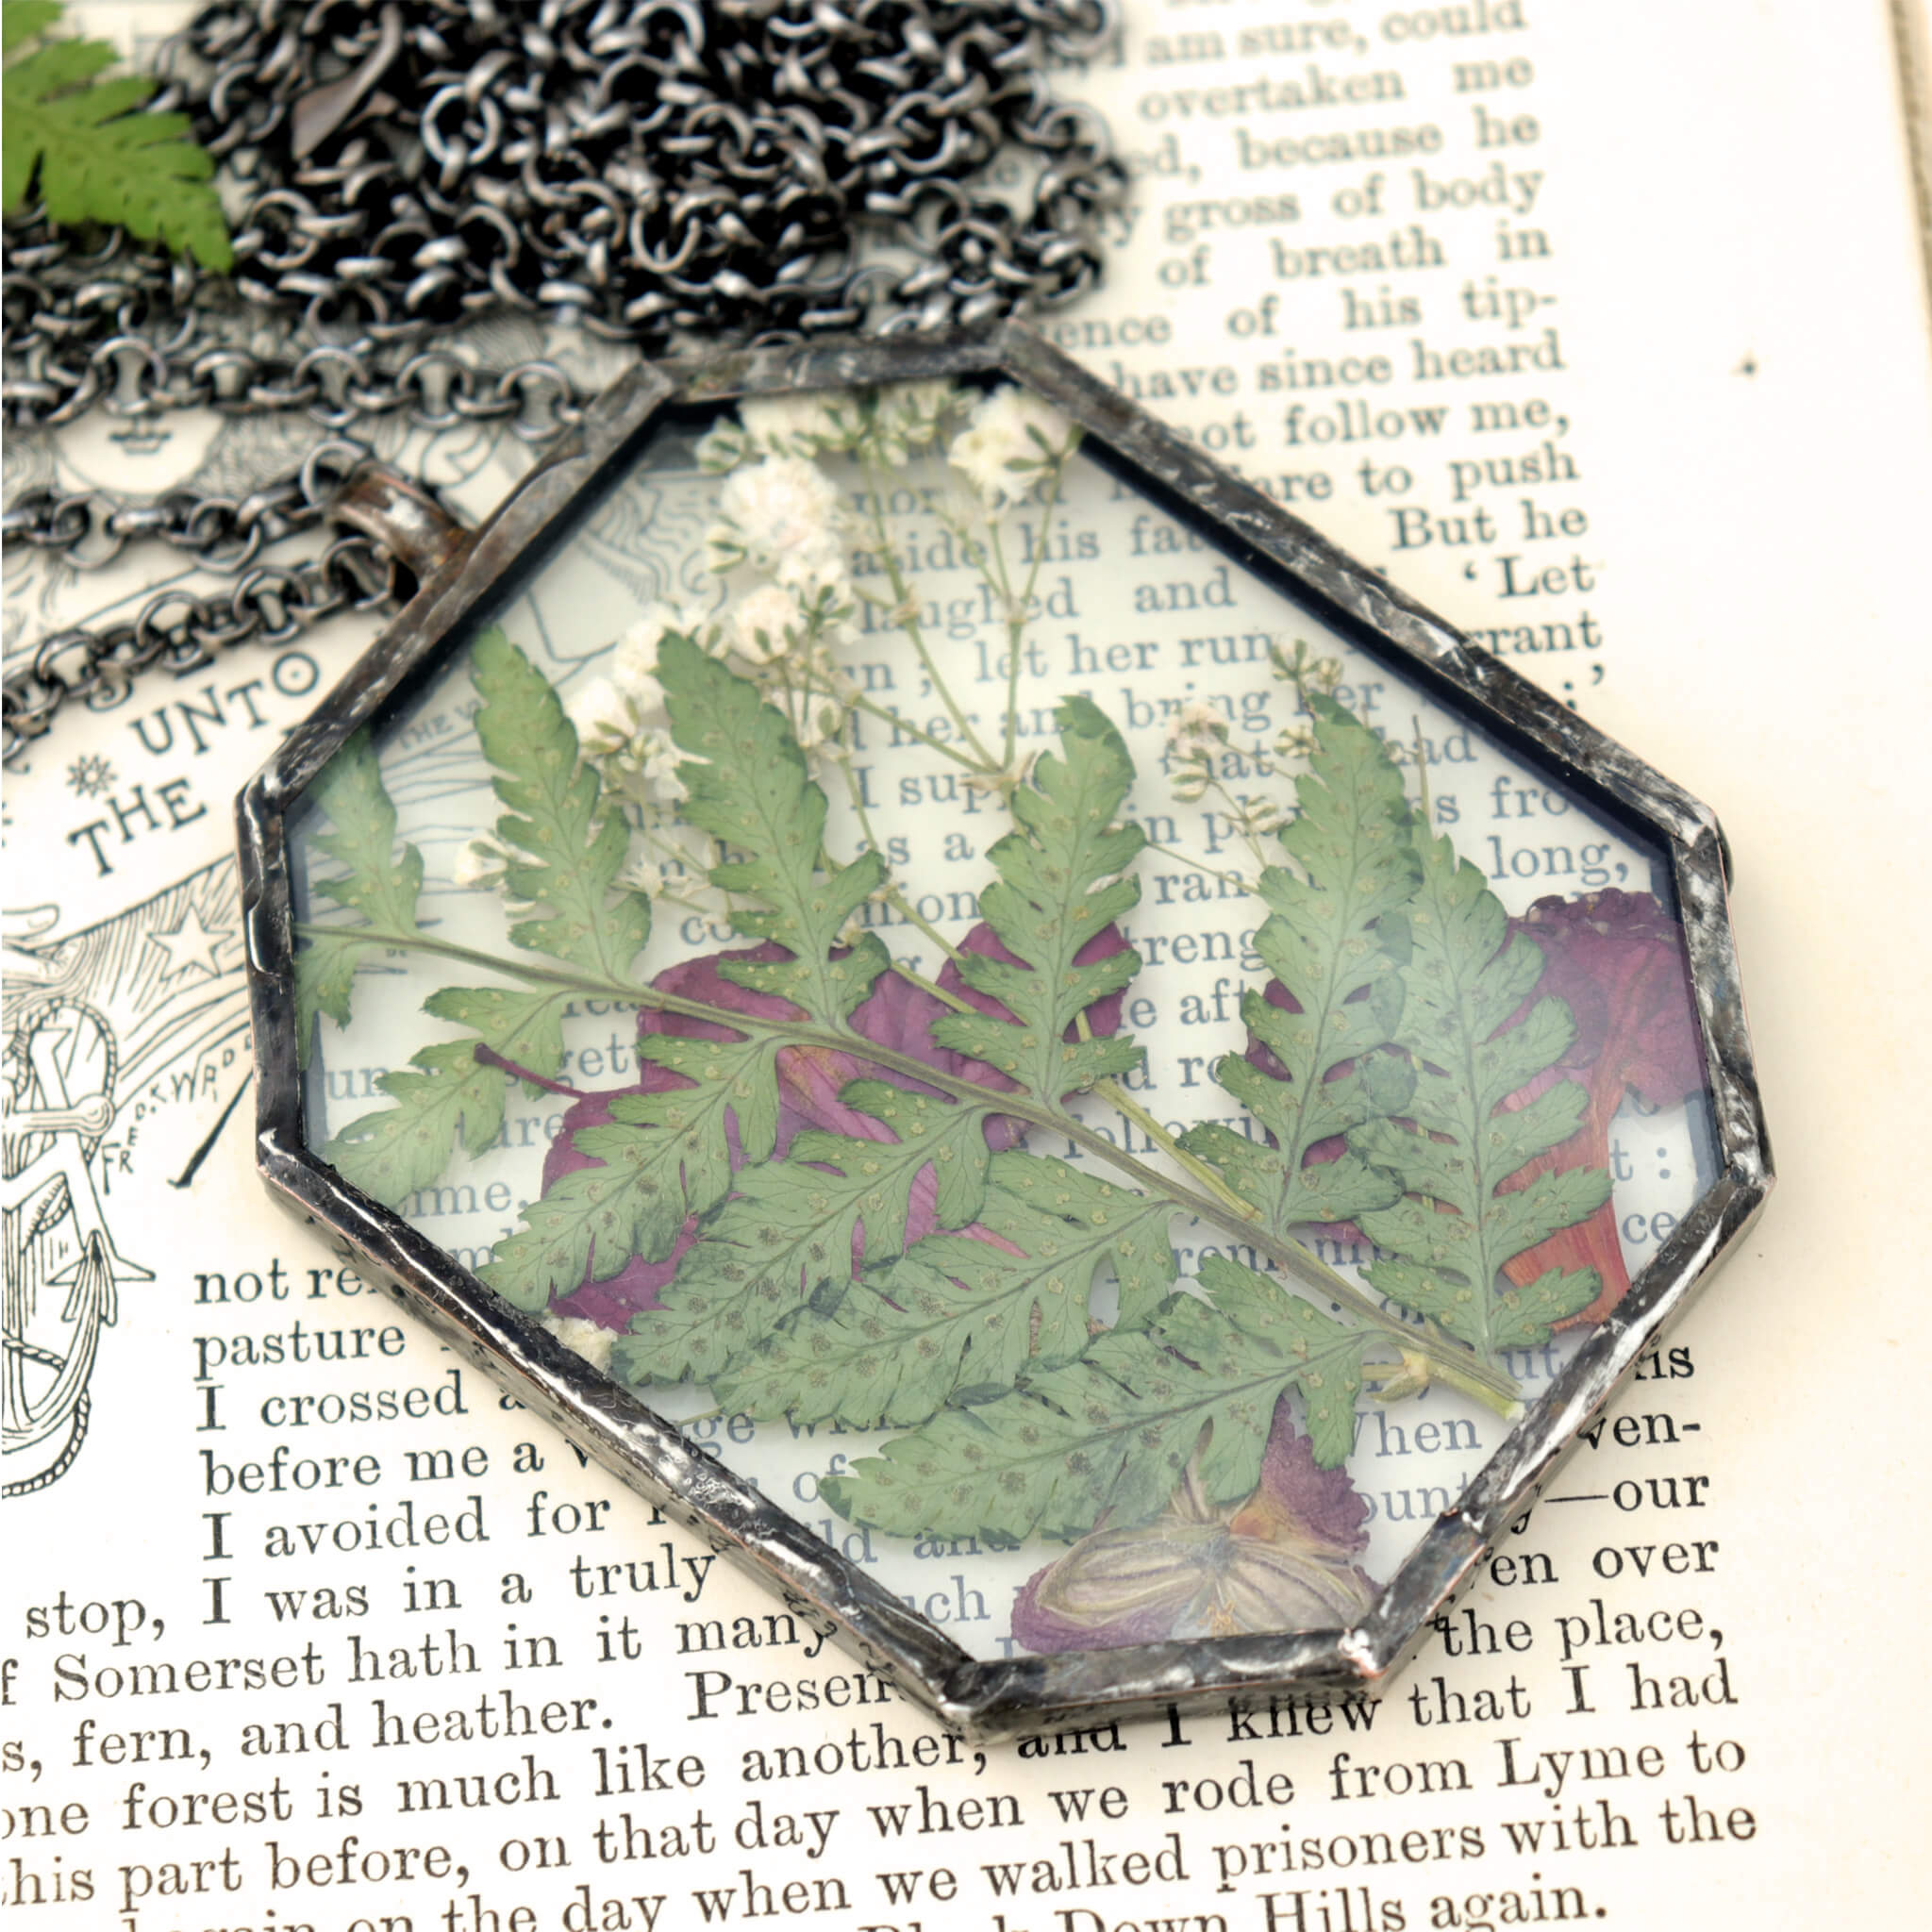 pink flowers and green ferns in glass and solder necklace lying on an old book